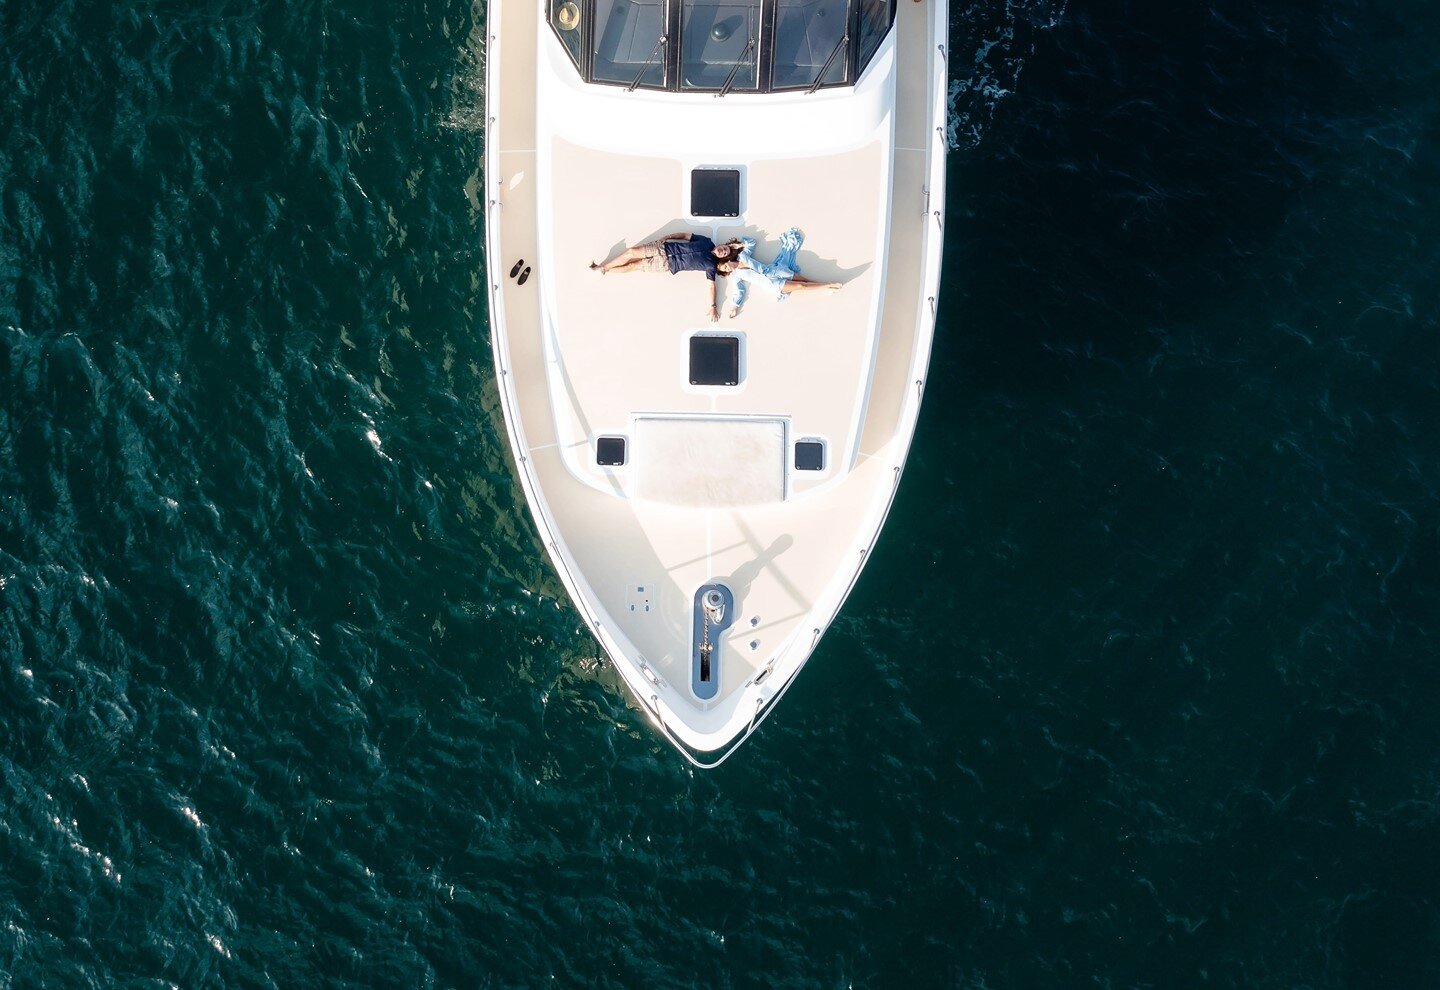 What can be better than a surprise proposal on an amazing yacht?⁠
 🛥️💍⁠
.⁠
.⁠
.⁠
⁠
#engaged #engagement #engagementring #shesaidyes #love #bridetobe #wedding #bride #ido #gettingmarried #weddingphotography #cabo #cabophotographer #cabodestinationwe